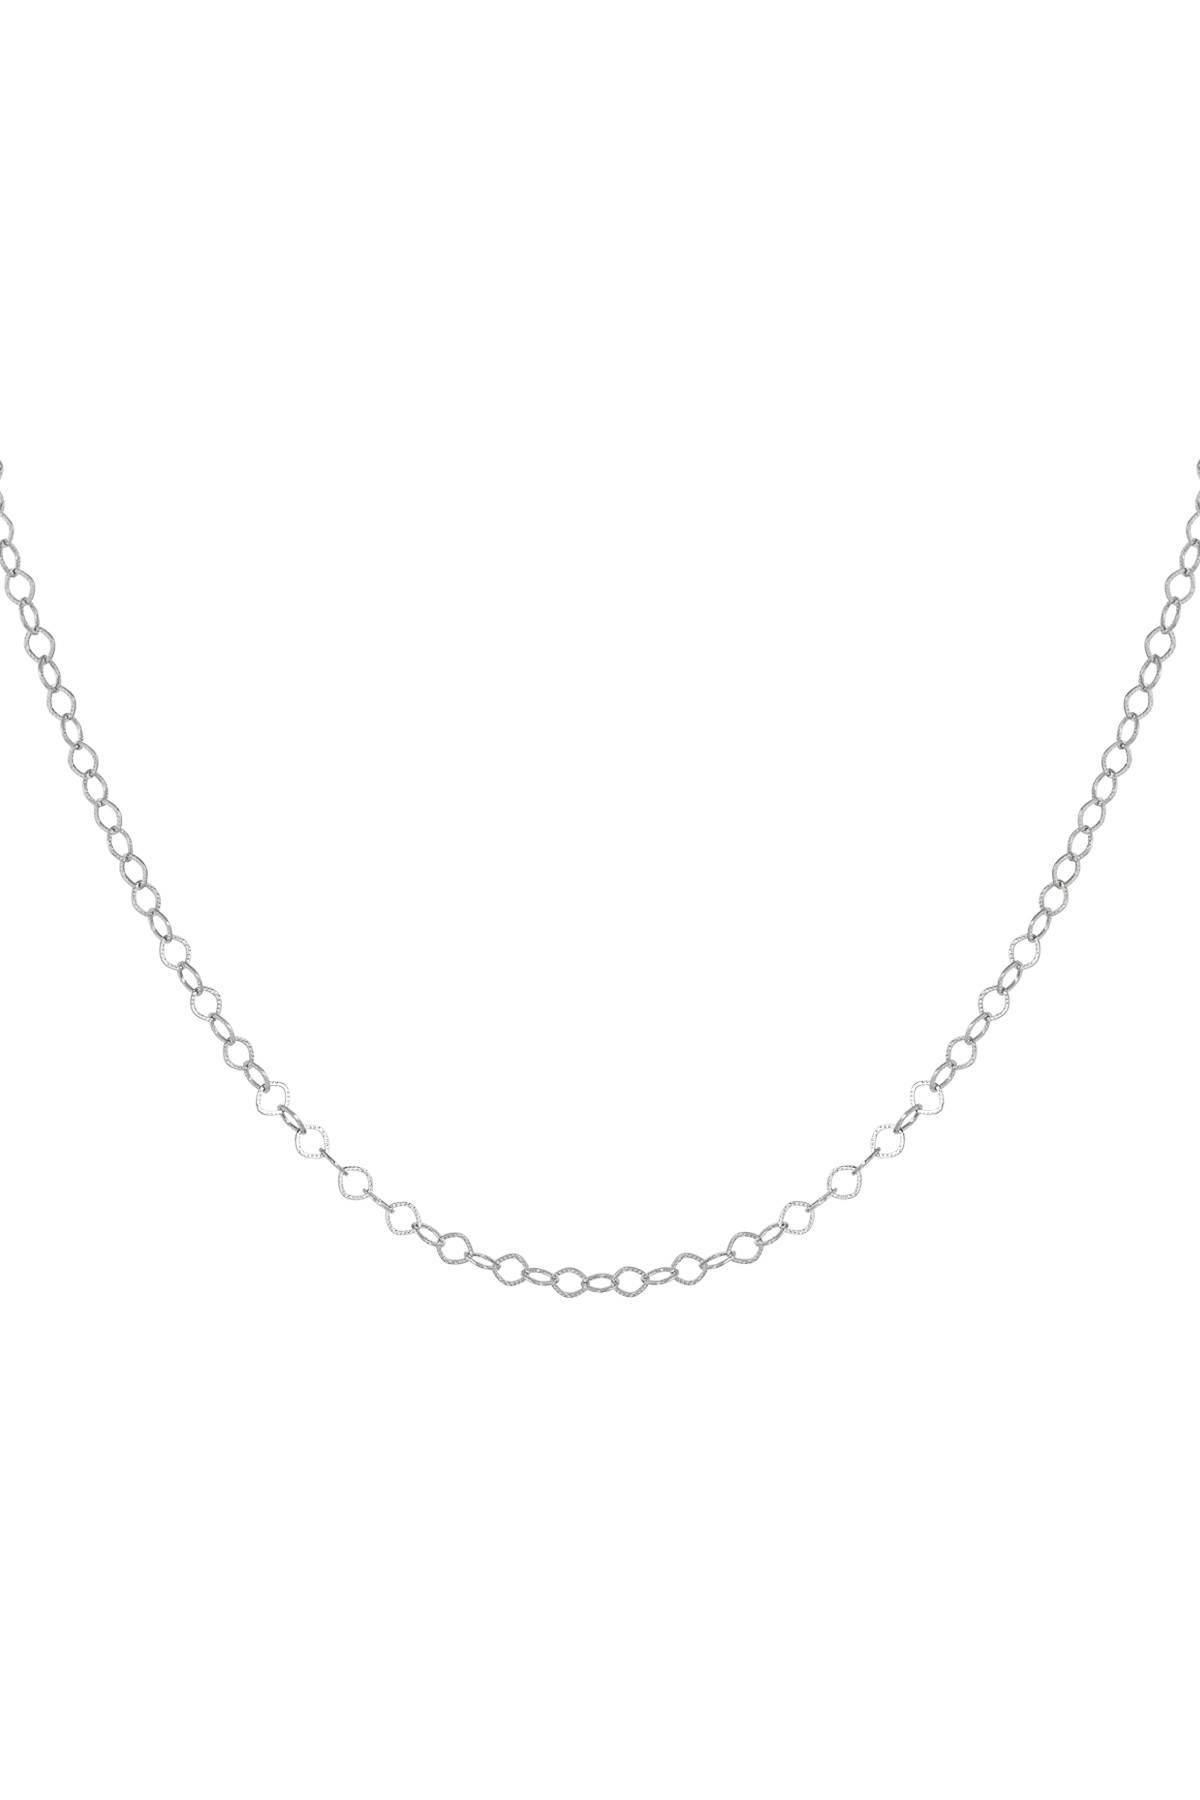 Link chain round links - silver 